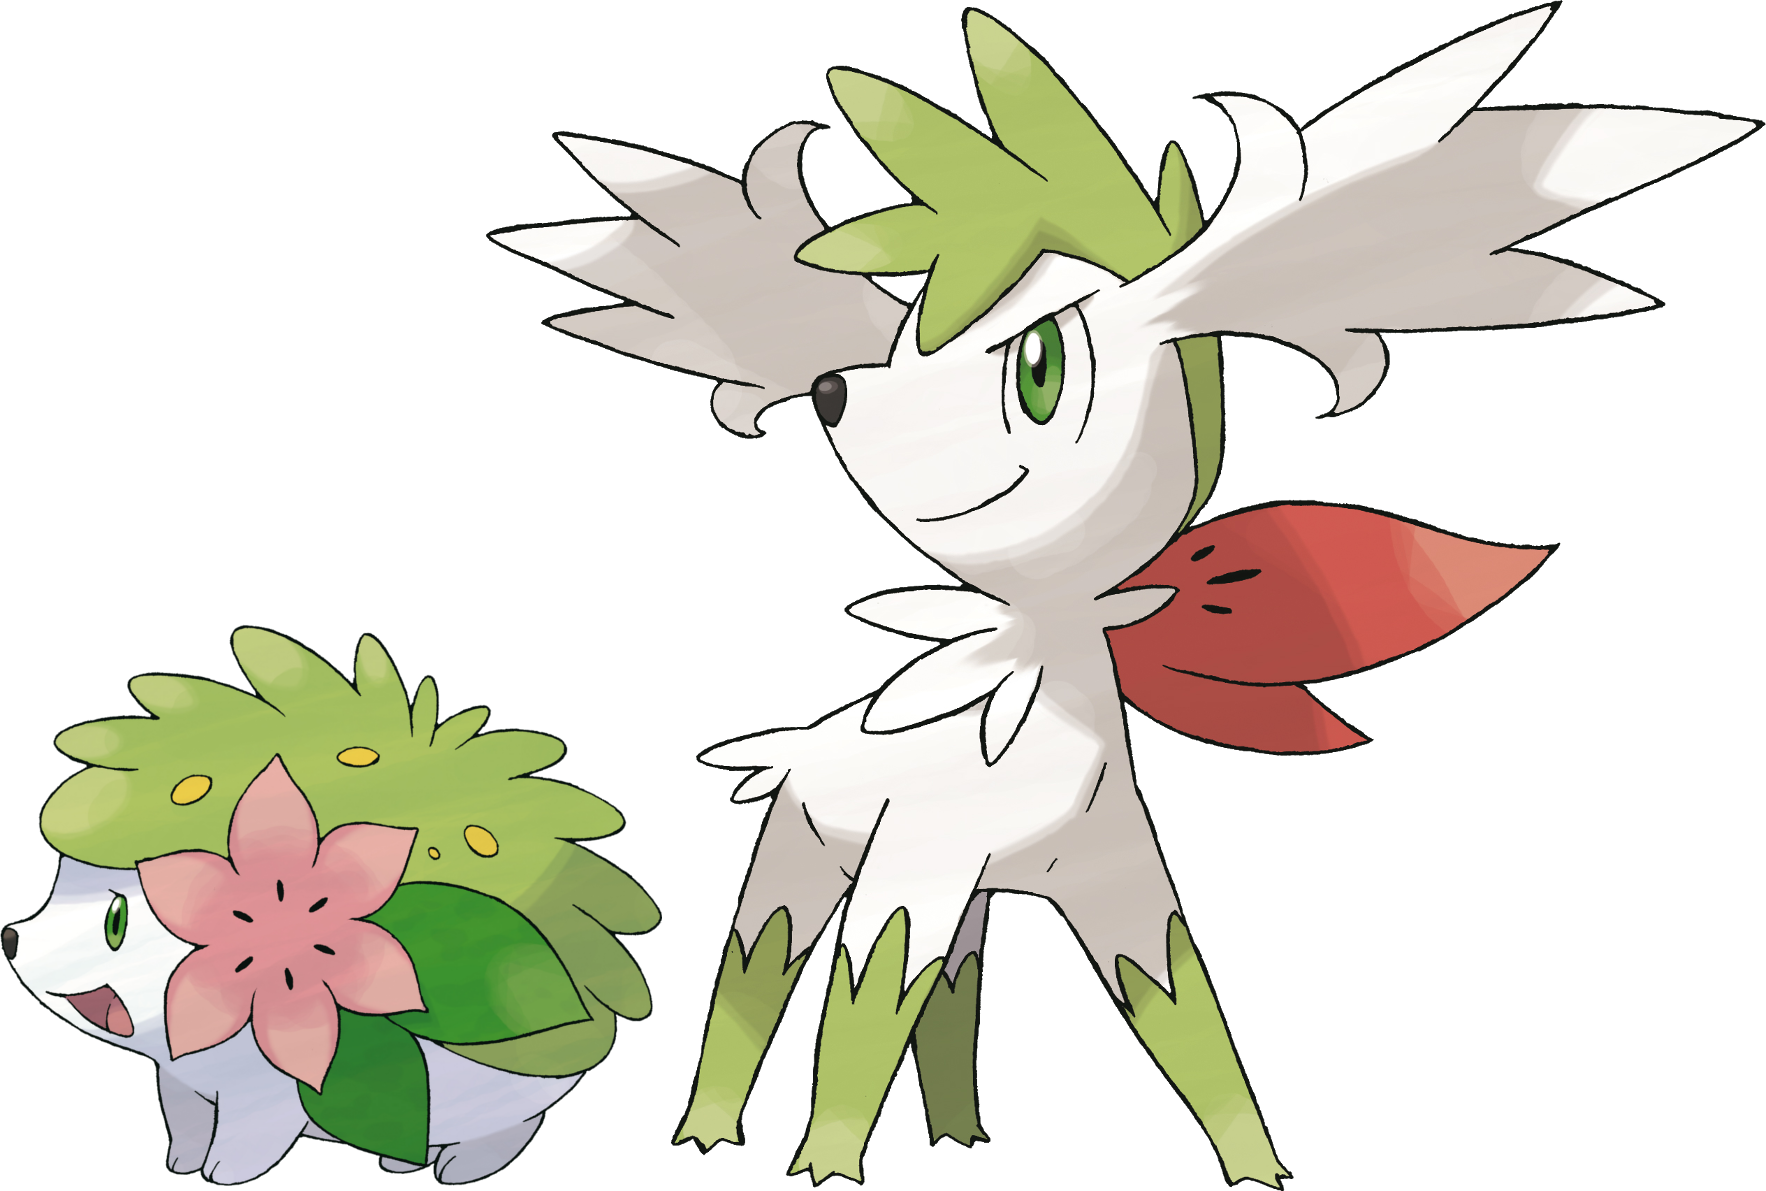 How GOOD was Shaymin ACTUALLY? - History of Shaymin in Competitive Pokemon  (Gens 4-7) 